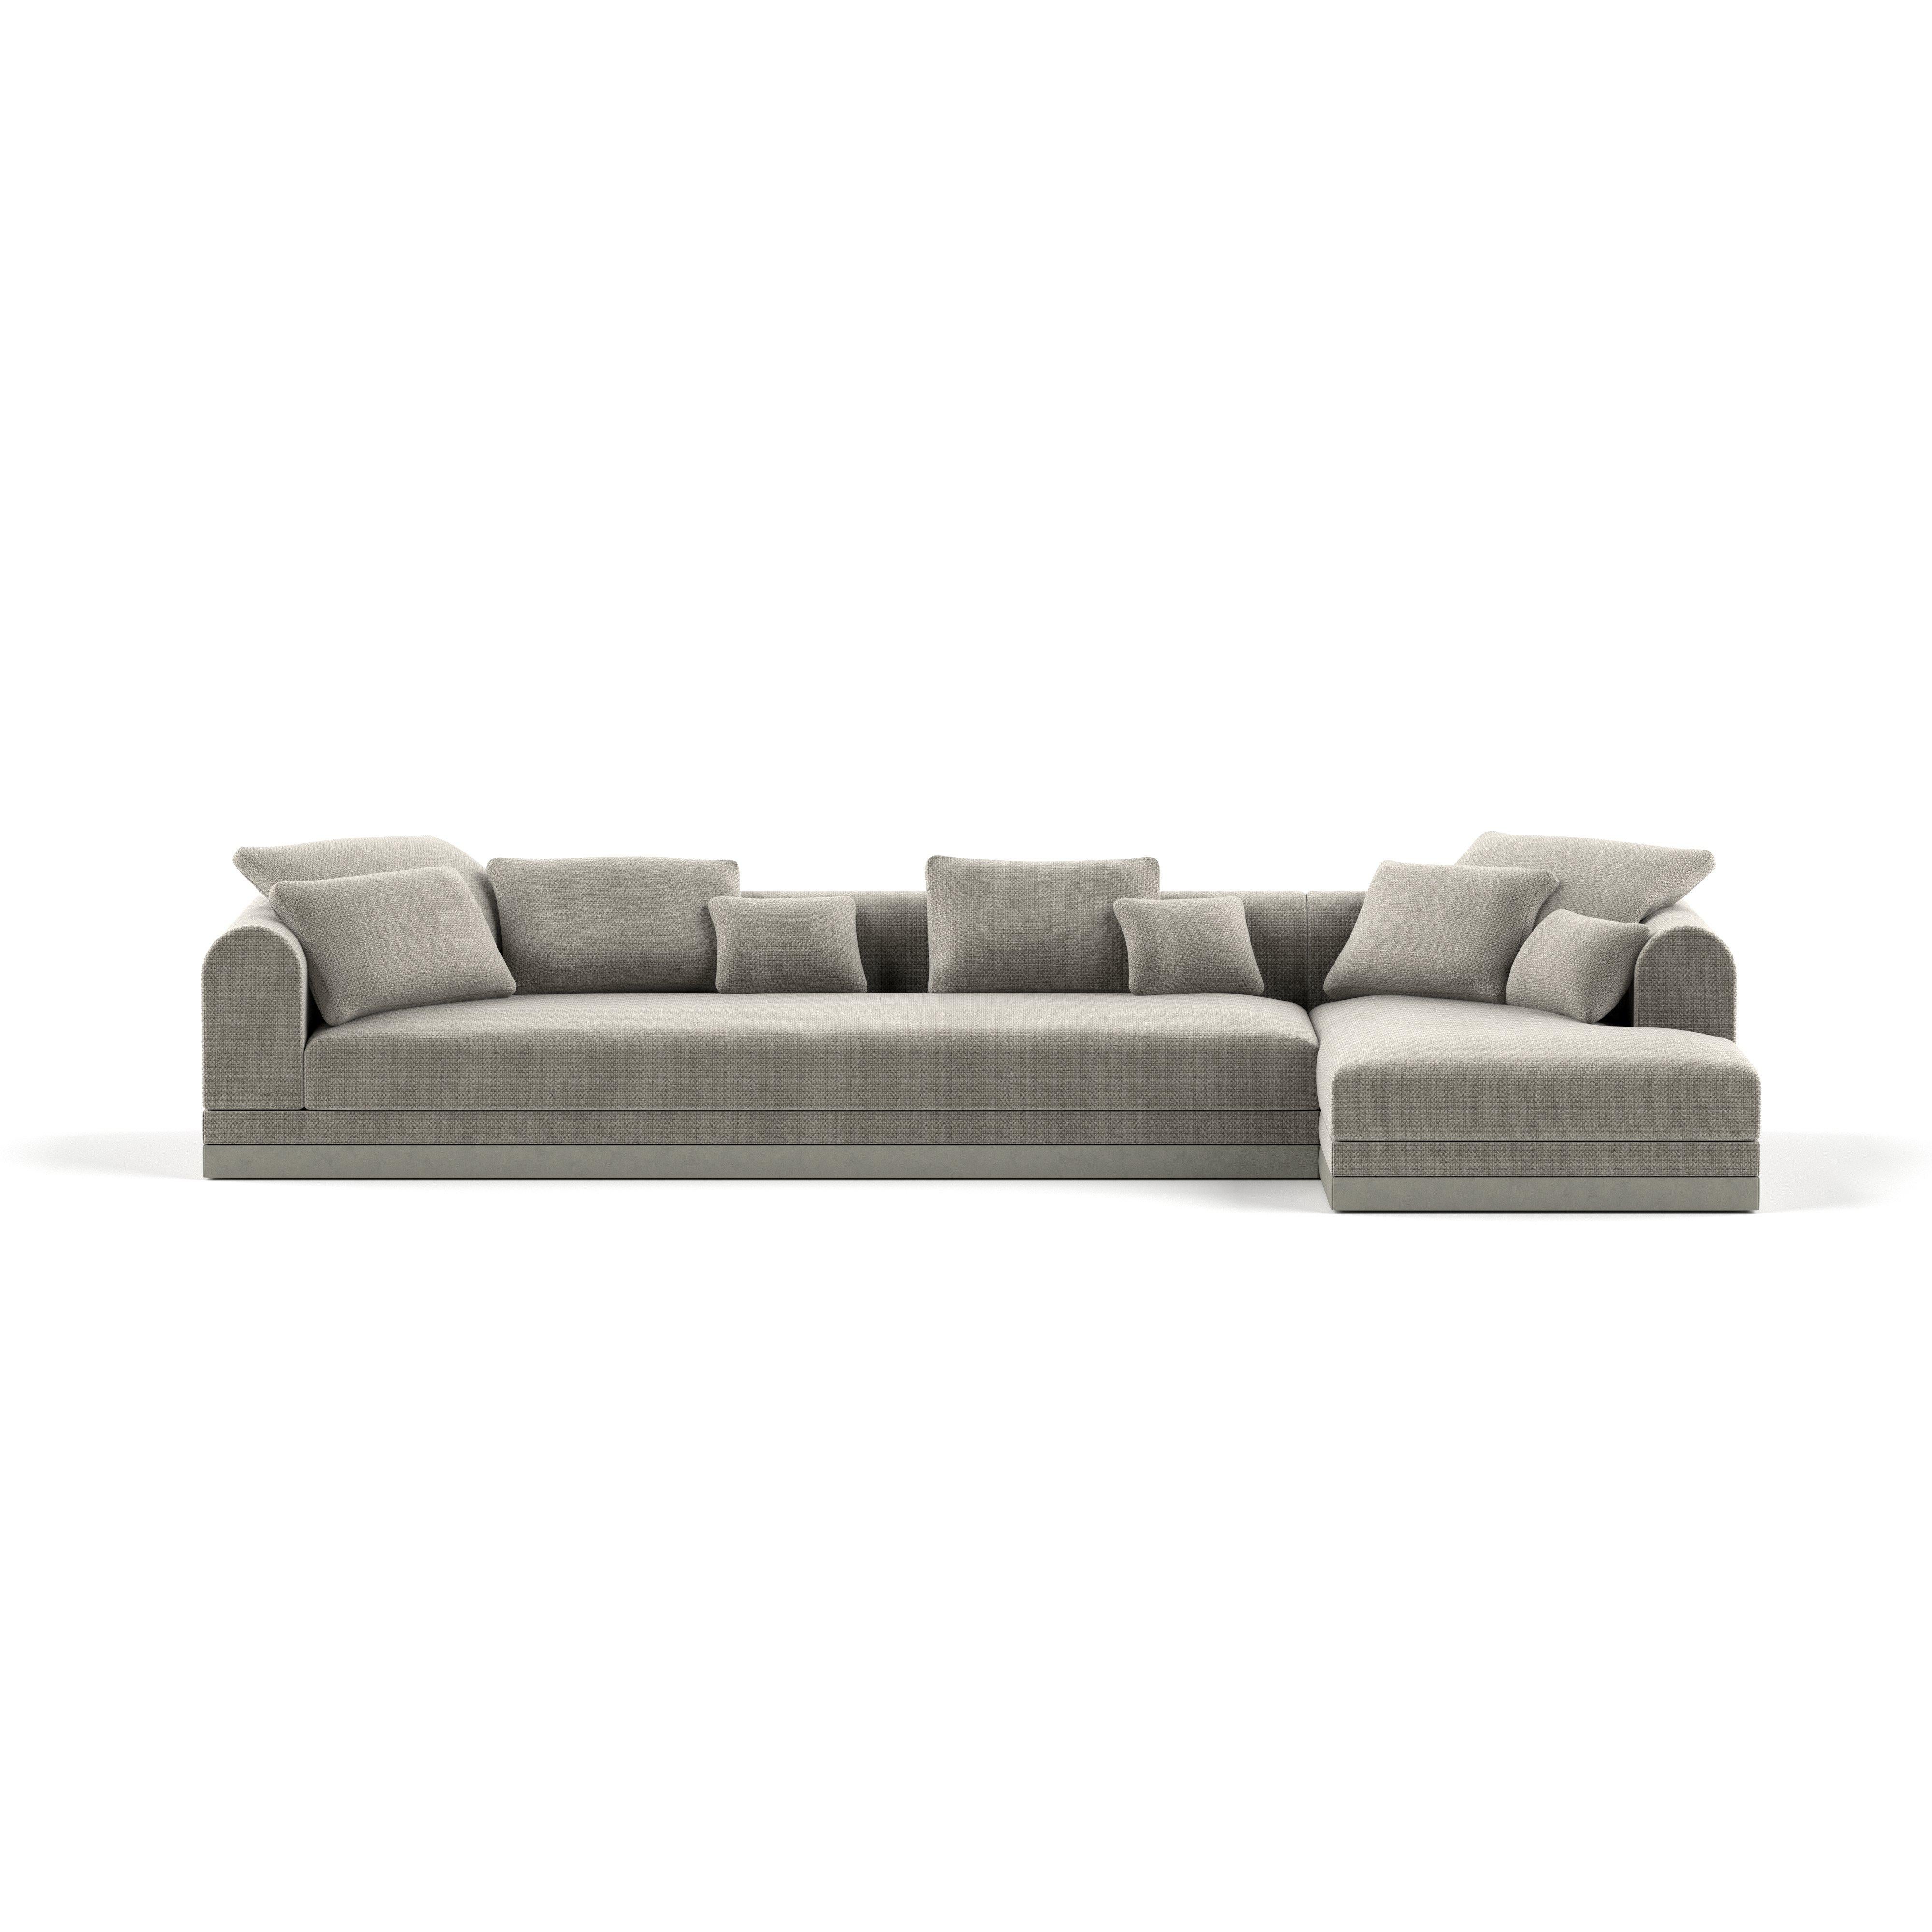 'Aqueduct' Contemporary Sofa by Poiat, Setup 2, Yang 95, High Plinth For Sale 3